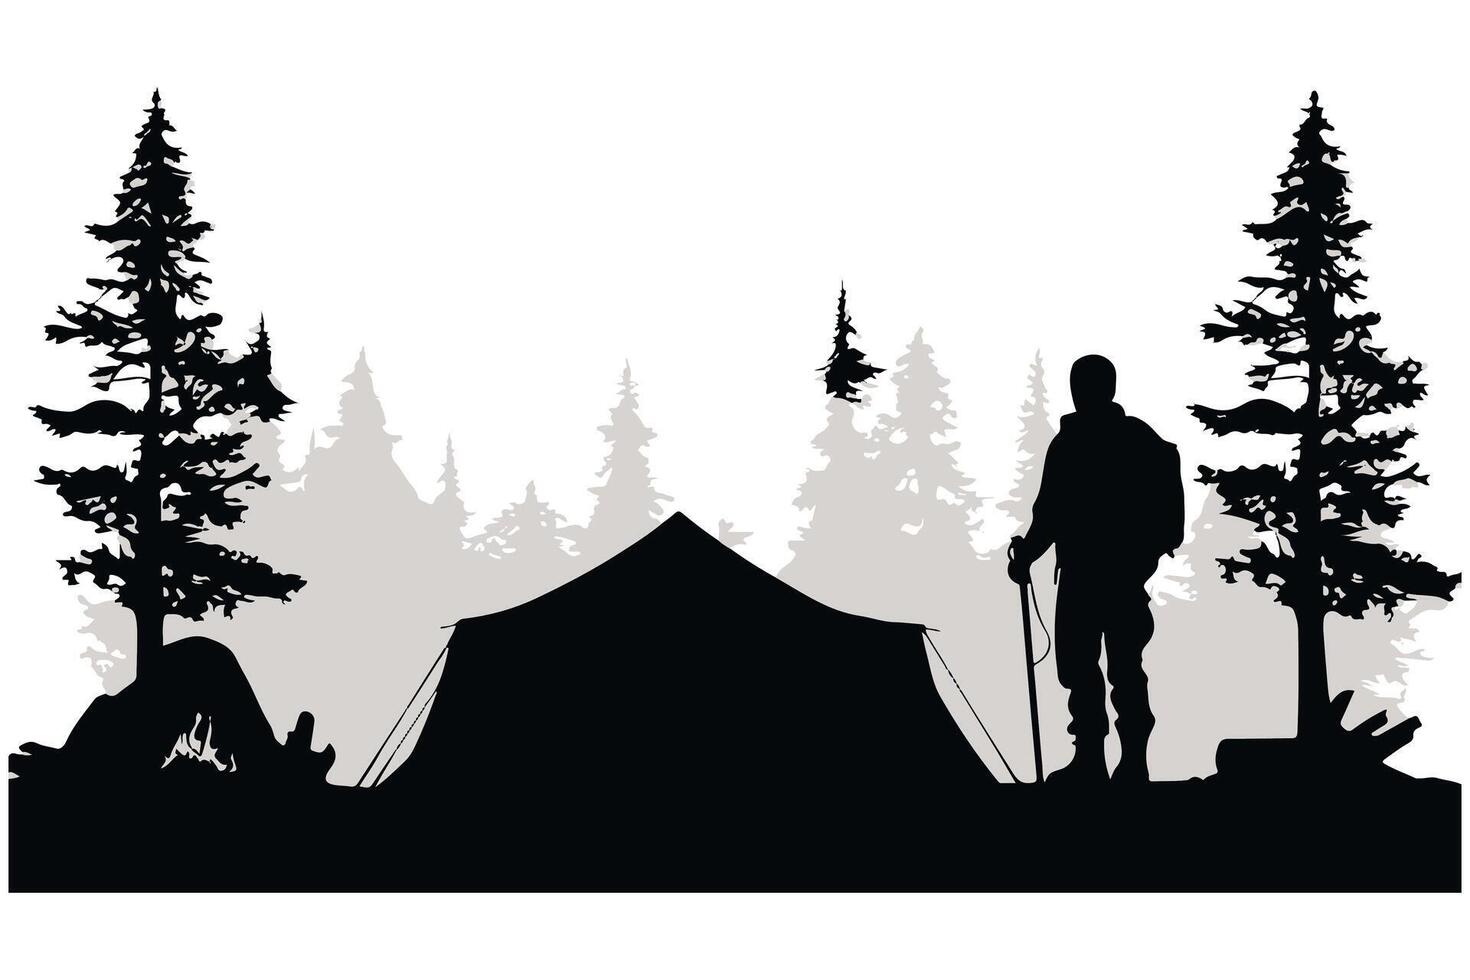 Camping black Silhouette vector